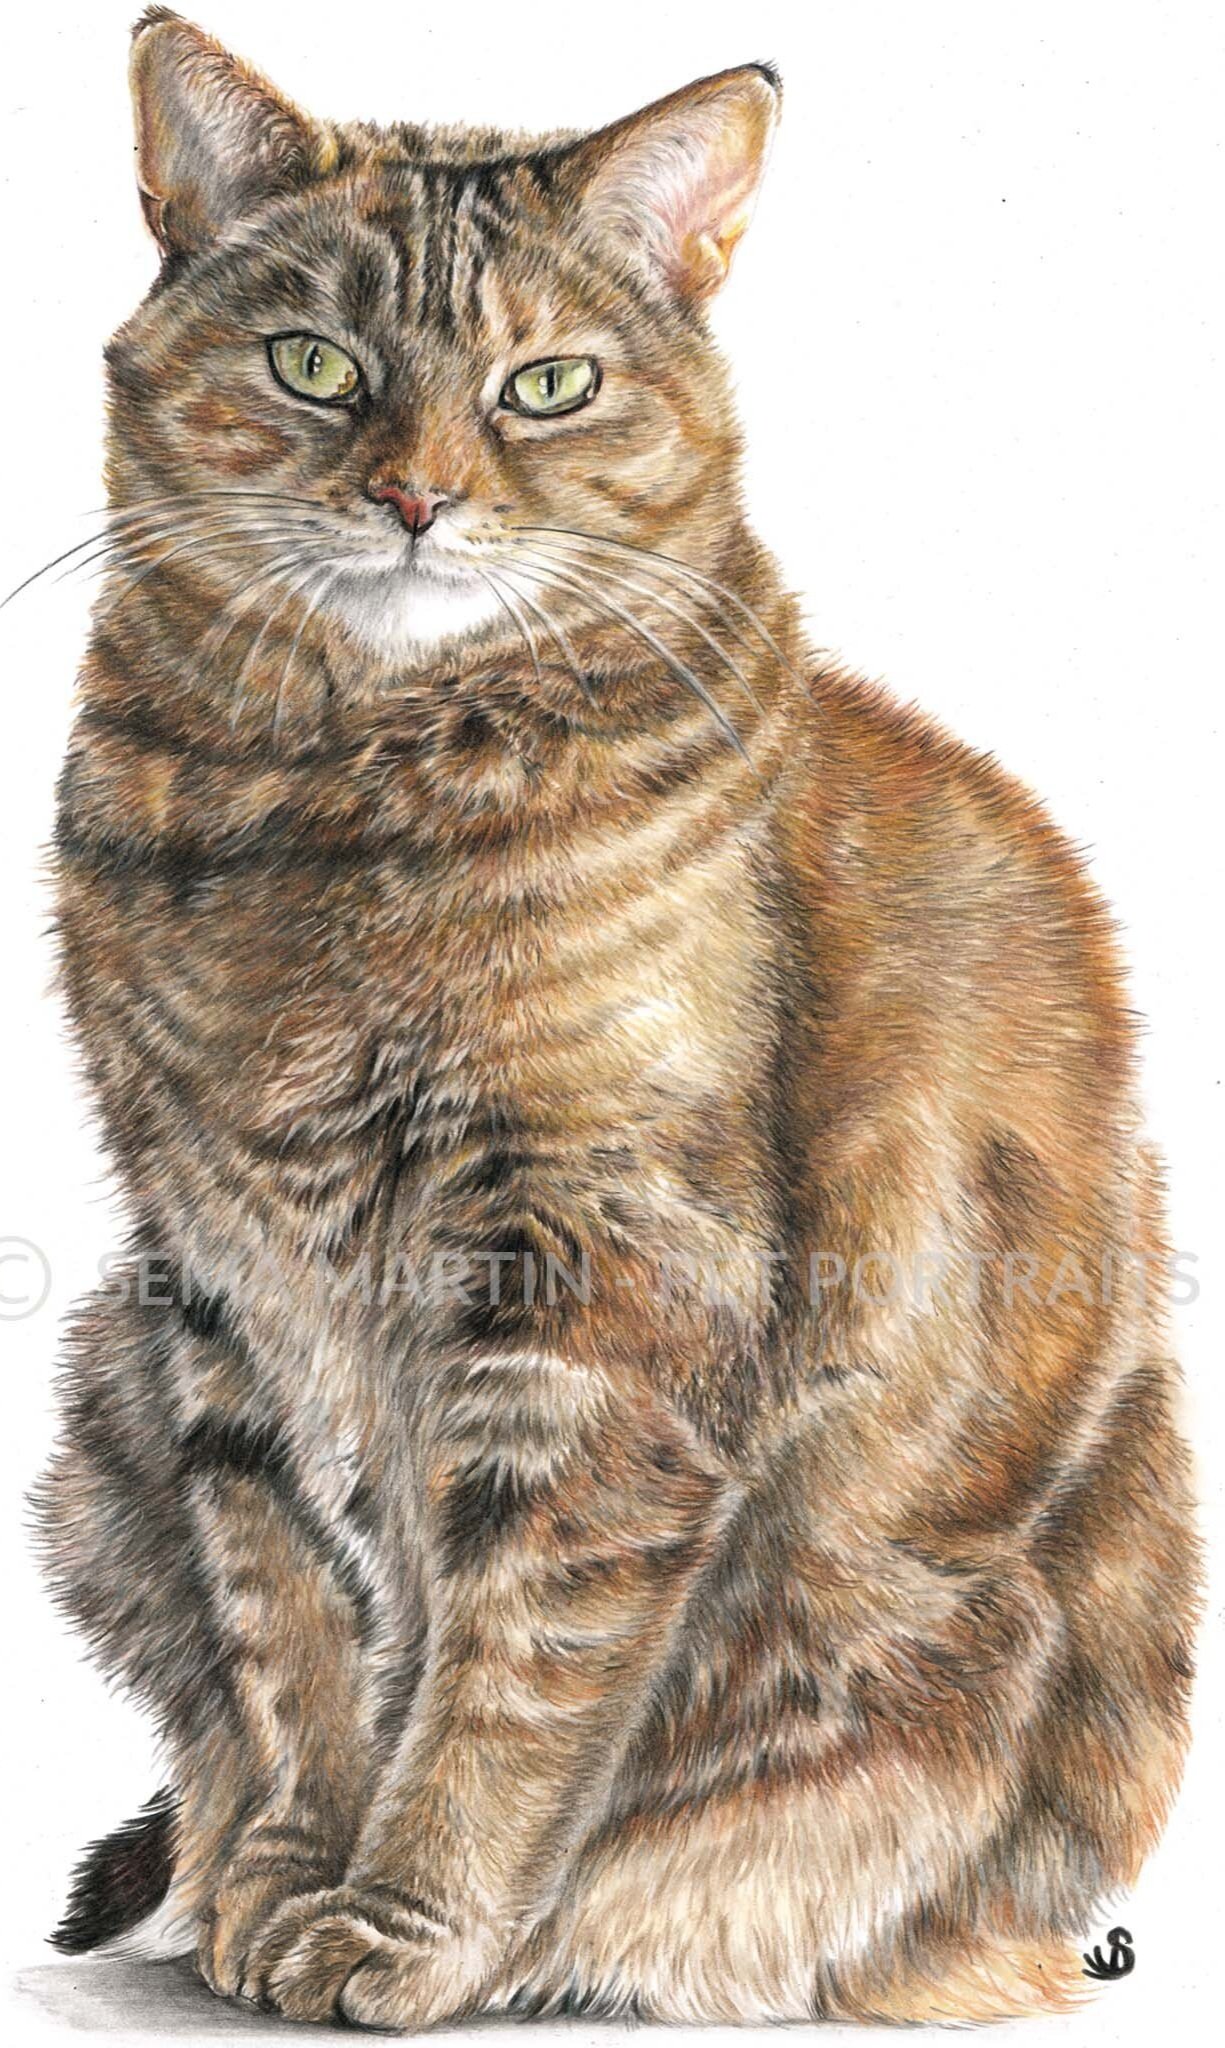 Drawing of Sweetie the golden tabby cat with yellow eyes from Alabama, USA (Copy)